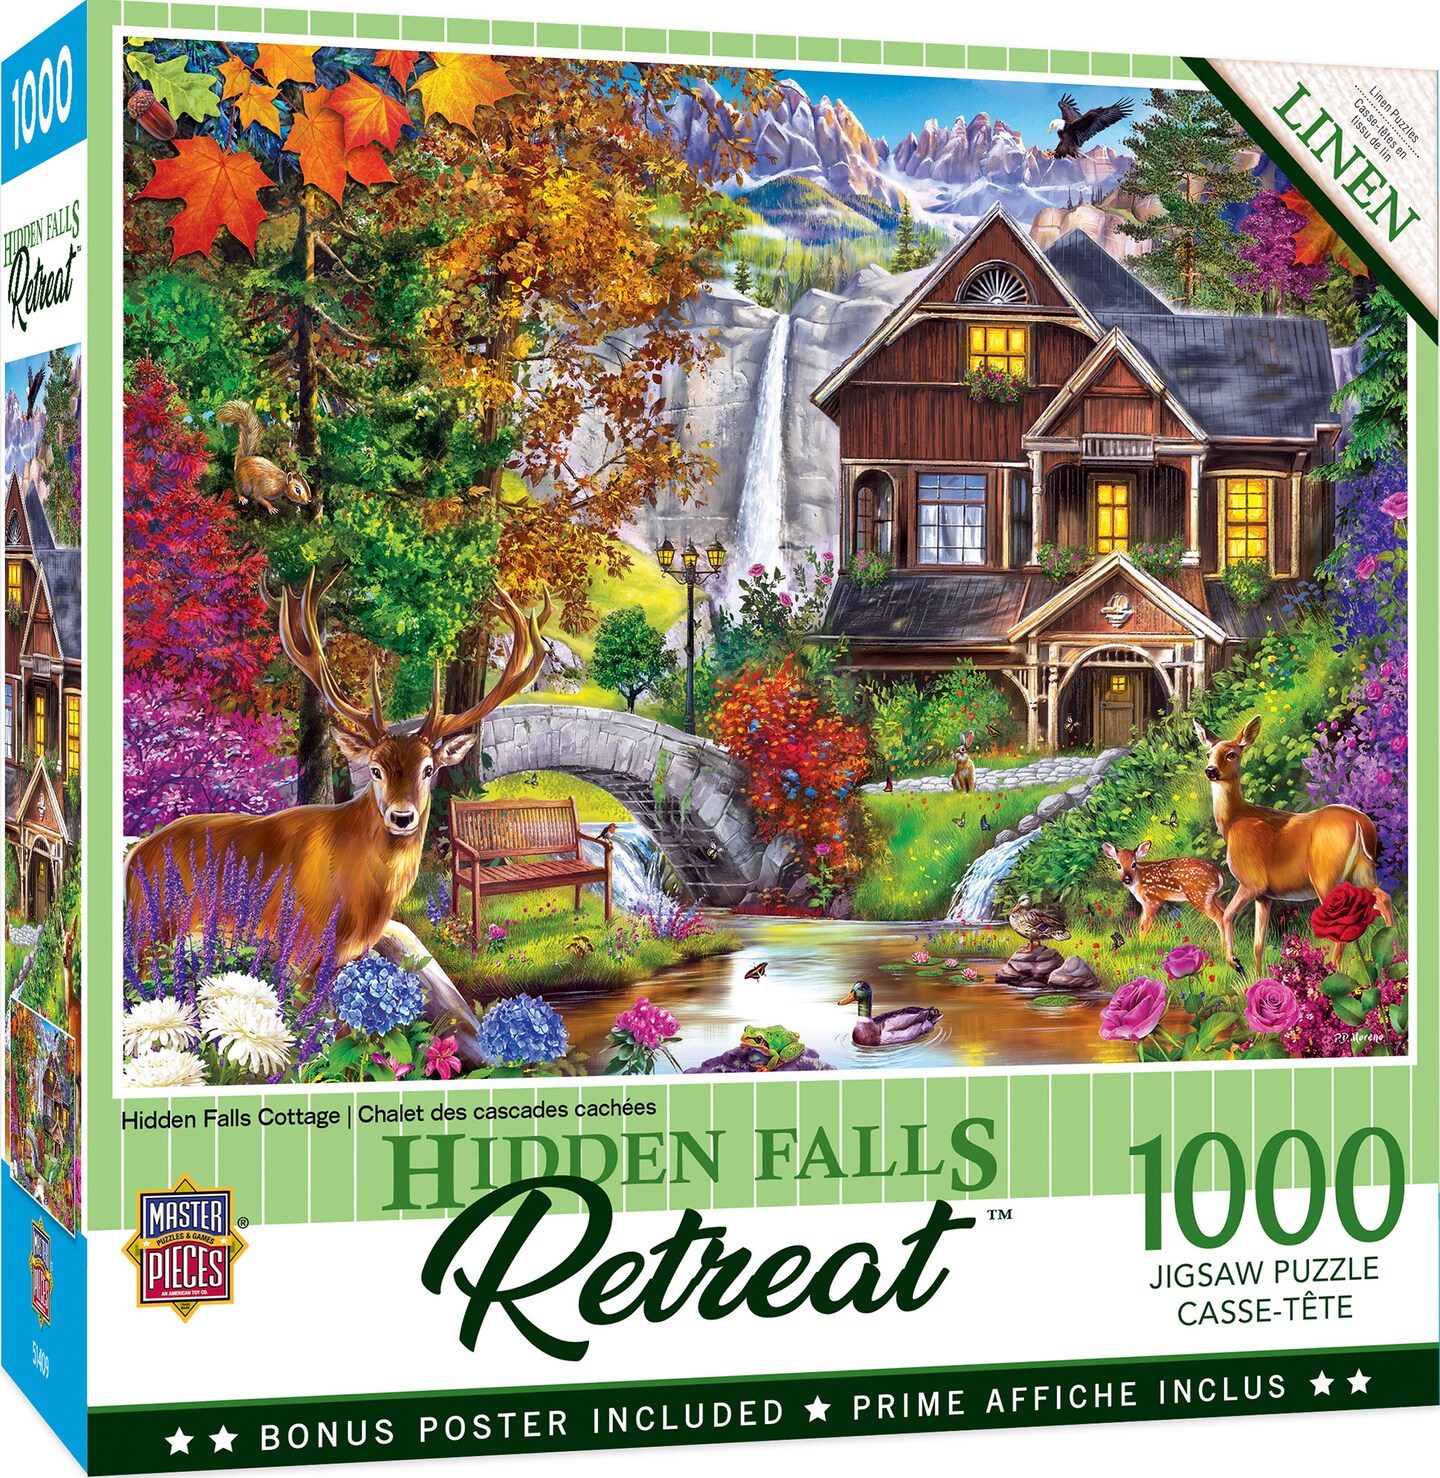 Masterpieces 1000 Piece Jigsaw Puzzle for Adults, Family, Or Kids